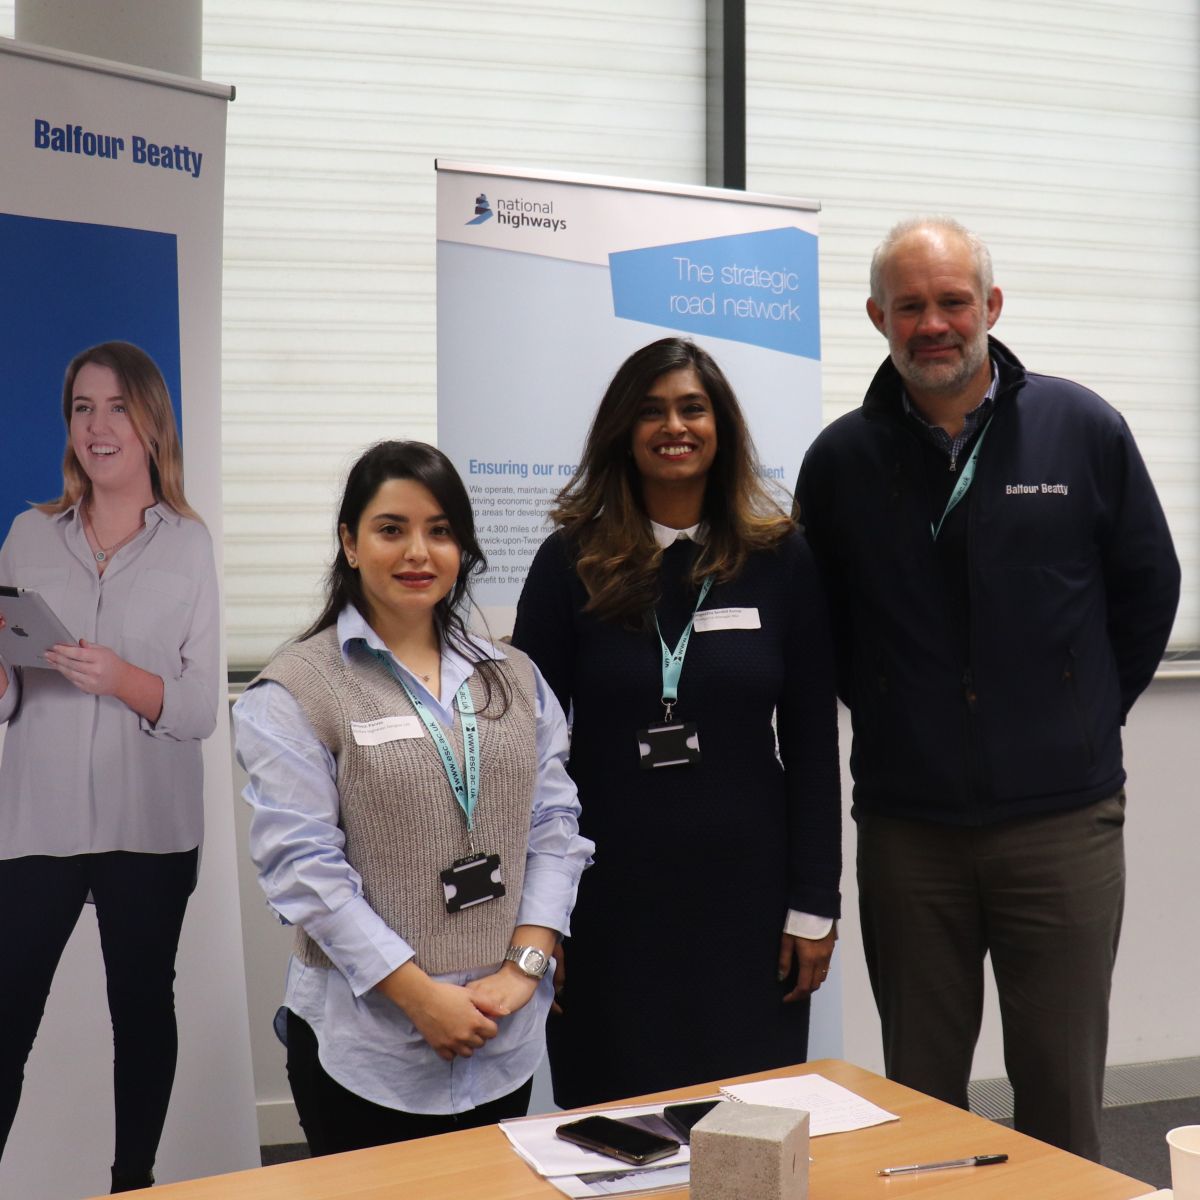 East Surrey College - National Highways & Balfour Beatty Careers Event